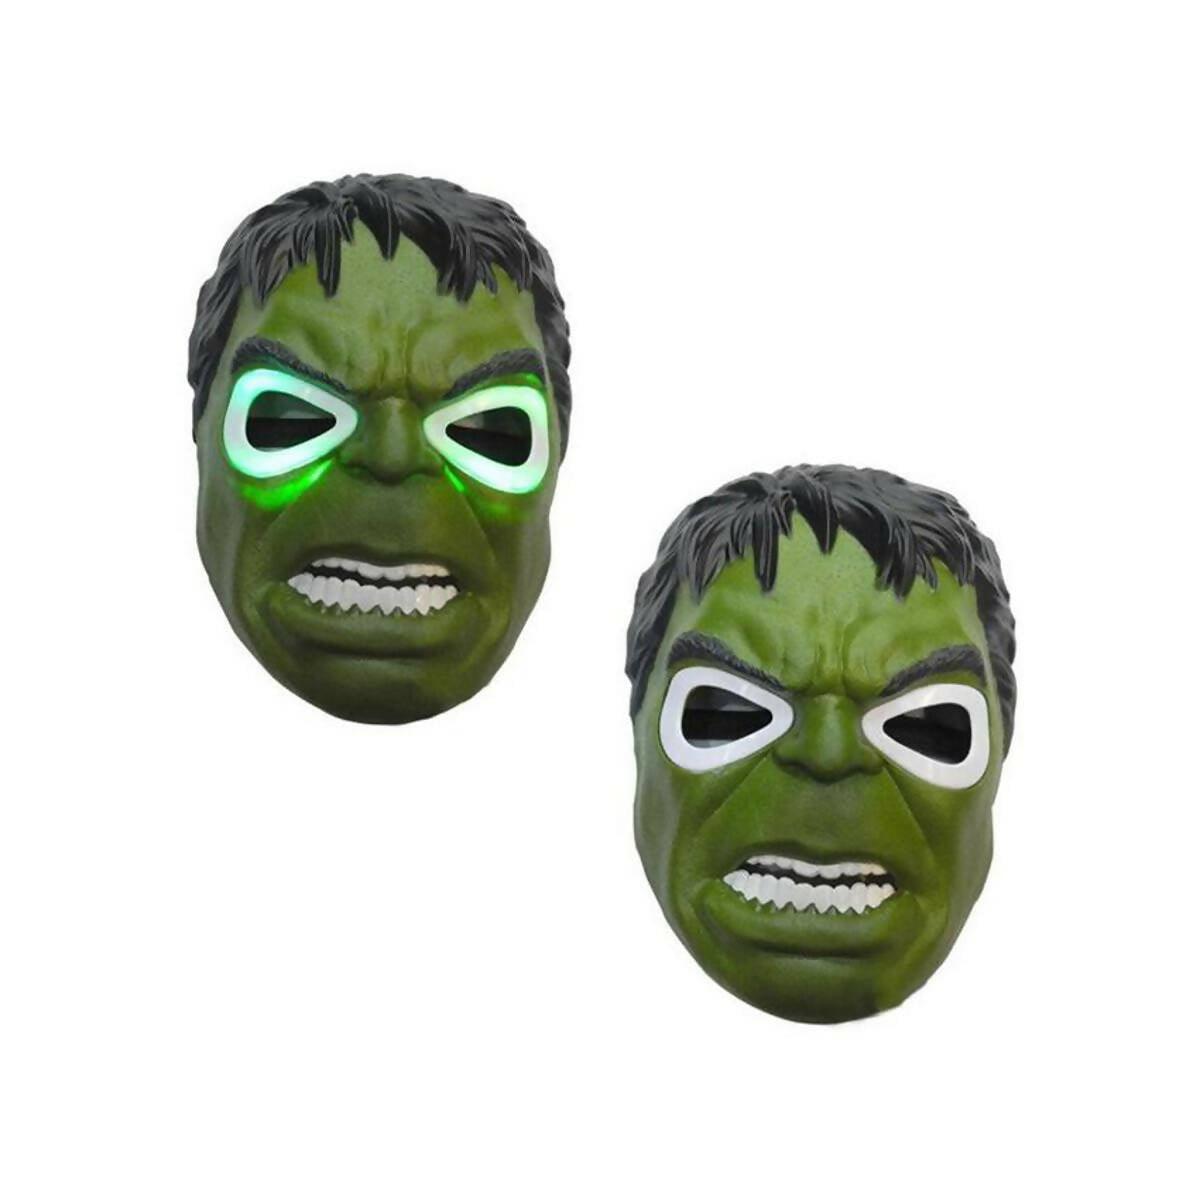 Incredible Hulk Mask With Light - ValueBox